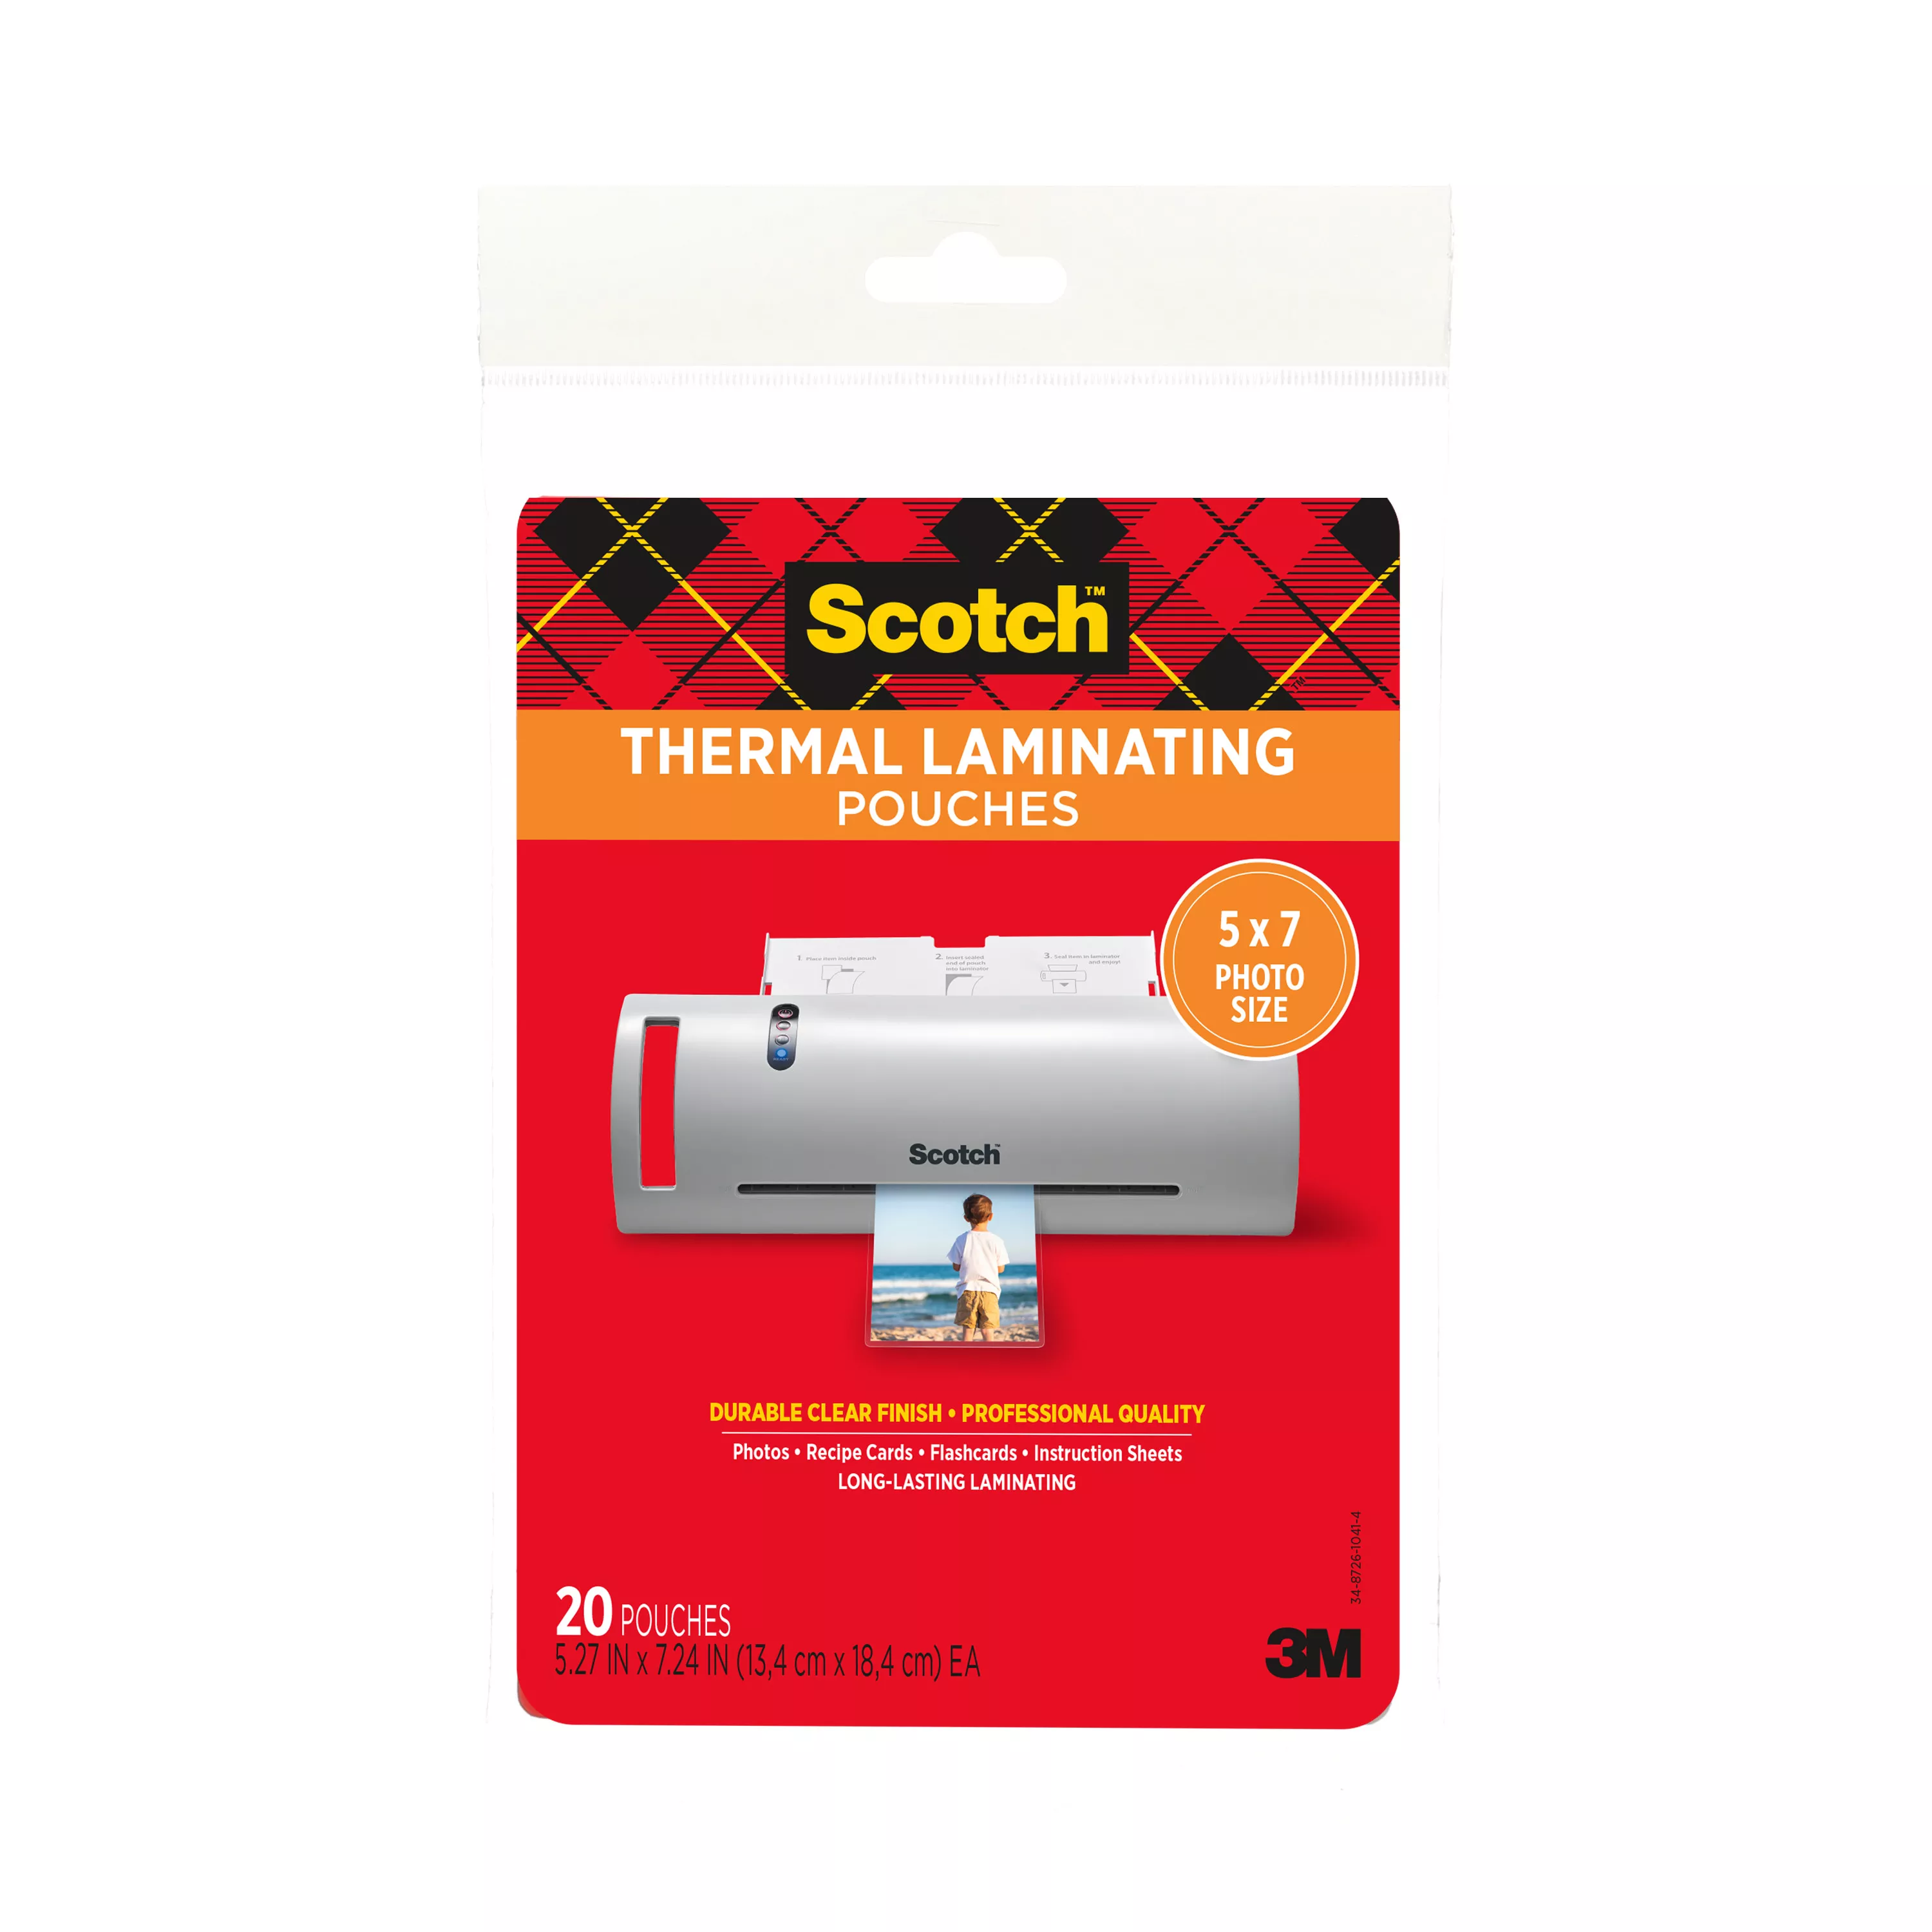 SKU 7010369853 | Scotch™ Thermal Pouches TP5903-20 for items up to 5.27 in x 7.24 in